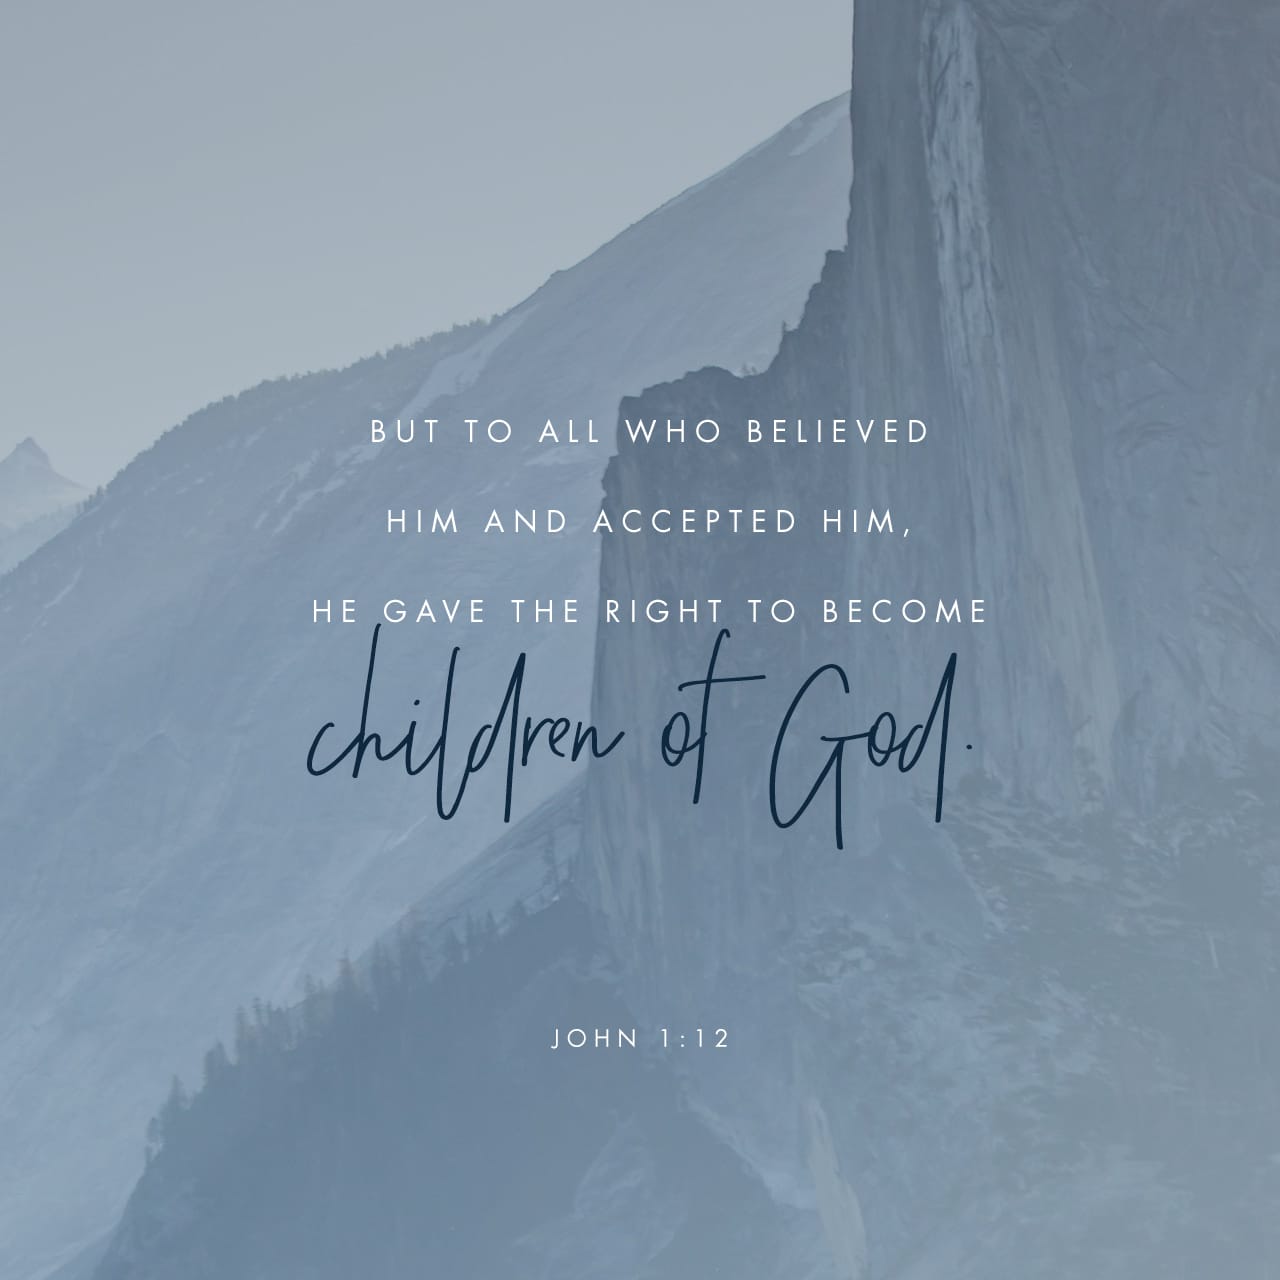 Bible Verse Of The Day Youversion